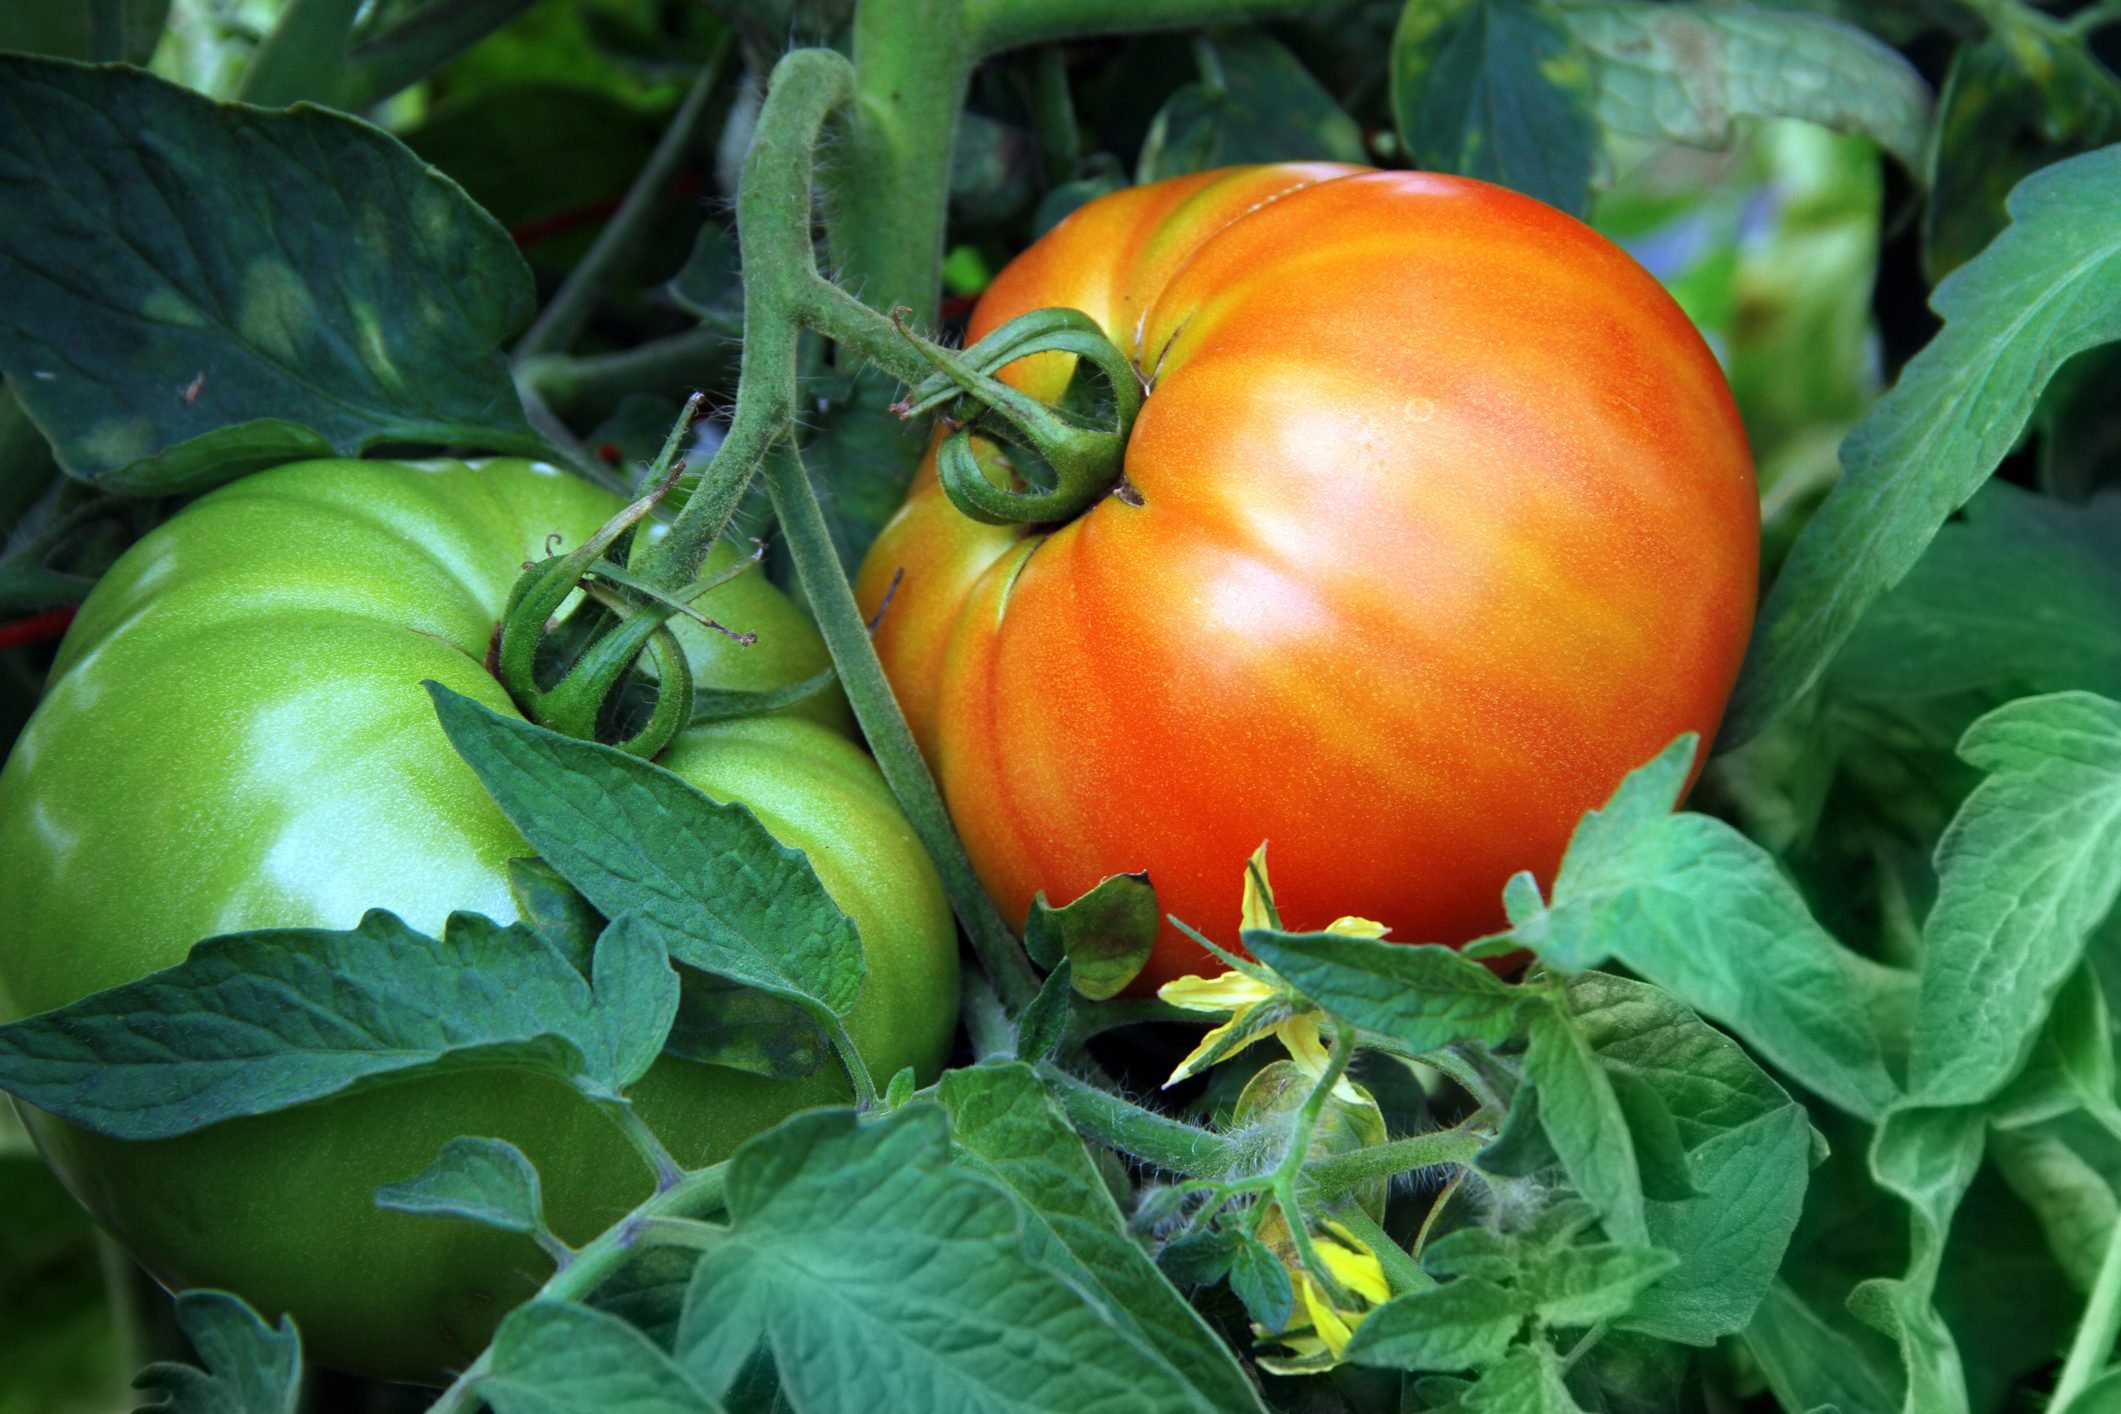 Growing Delicious Tomatoes at Home - Tips from Tomatoville to Help You Succeed.